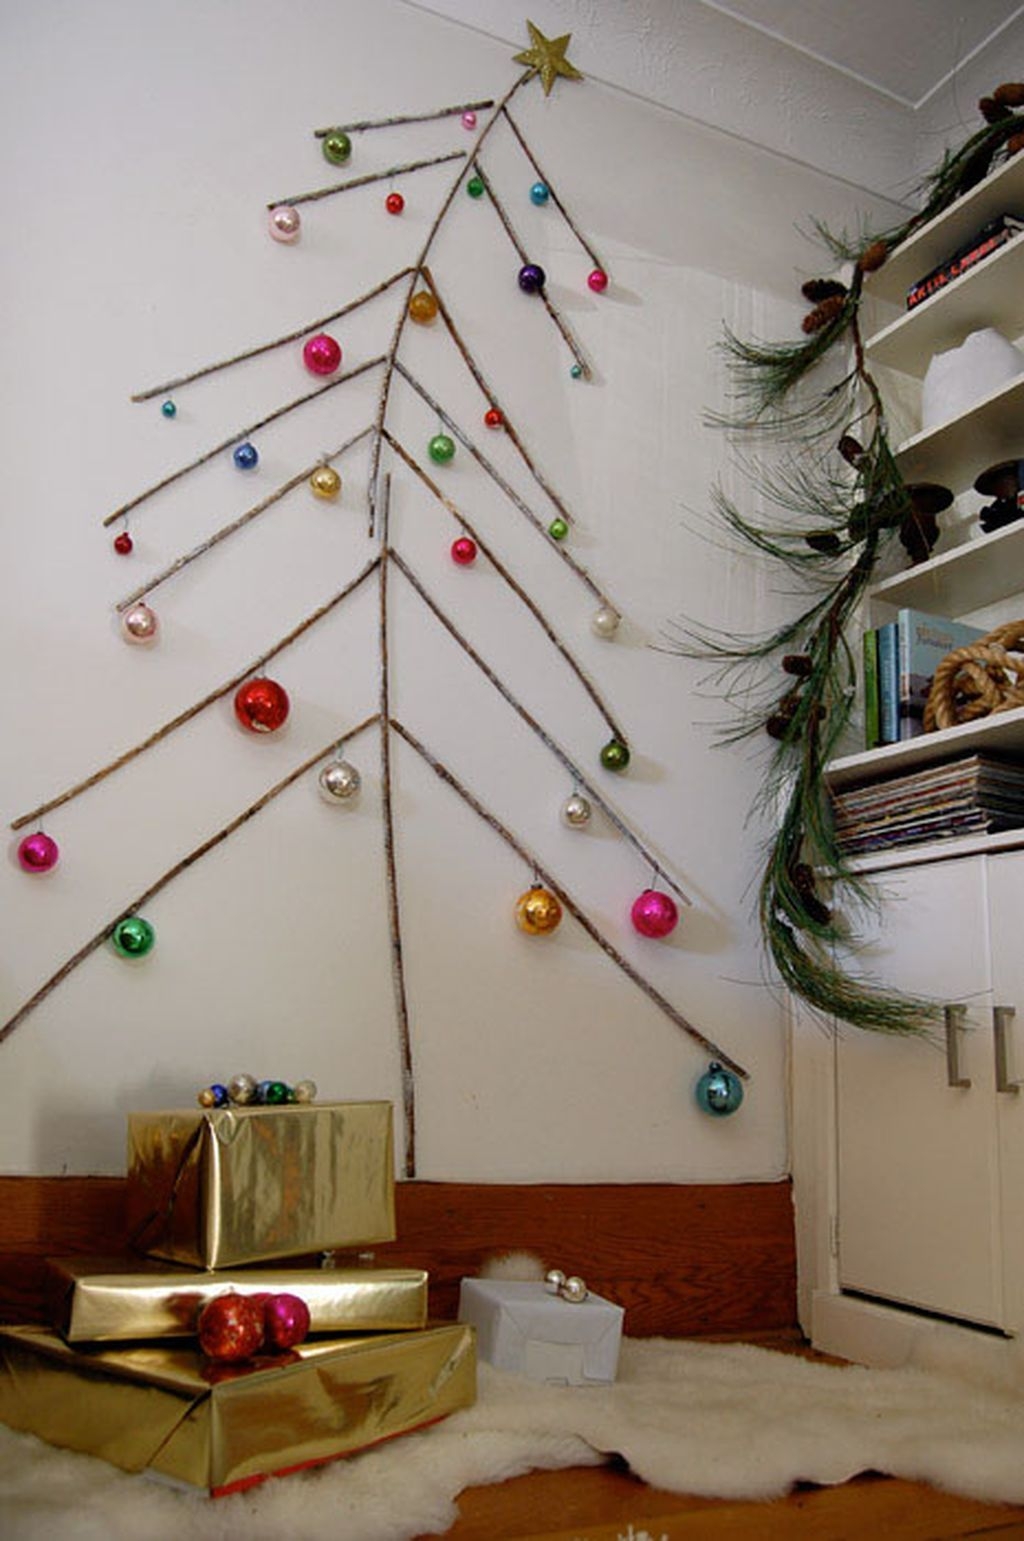 Inspiring Home Decoration Ideas With Small Christmas Tree 23